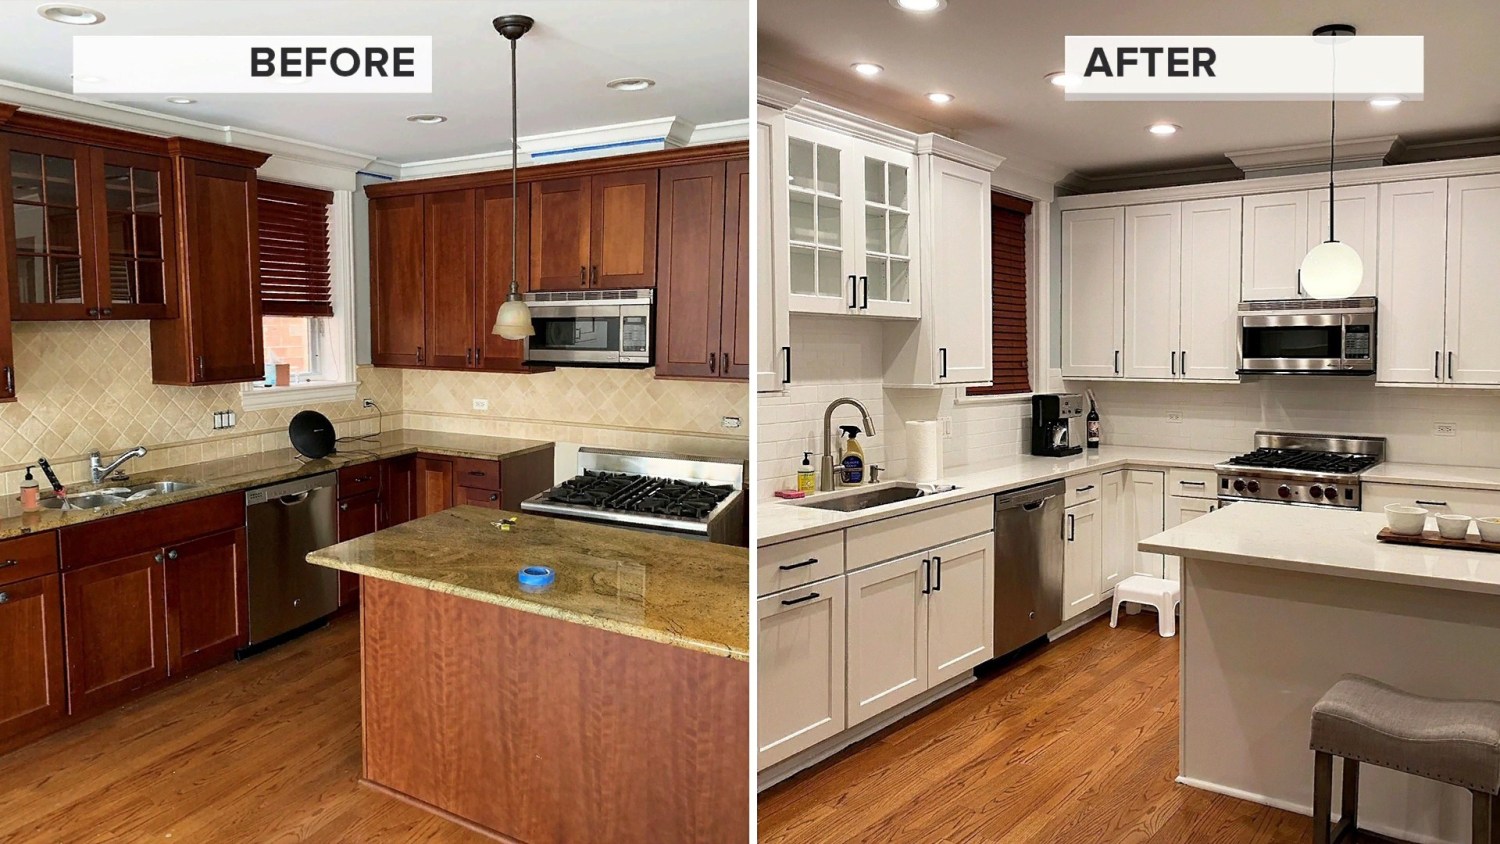 Easy Kitchen Gadget Upgrades – How I Faked a Kitchen Renovation on a Budget